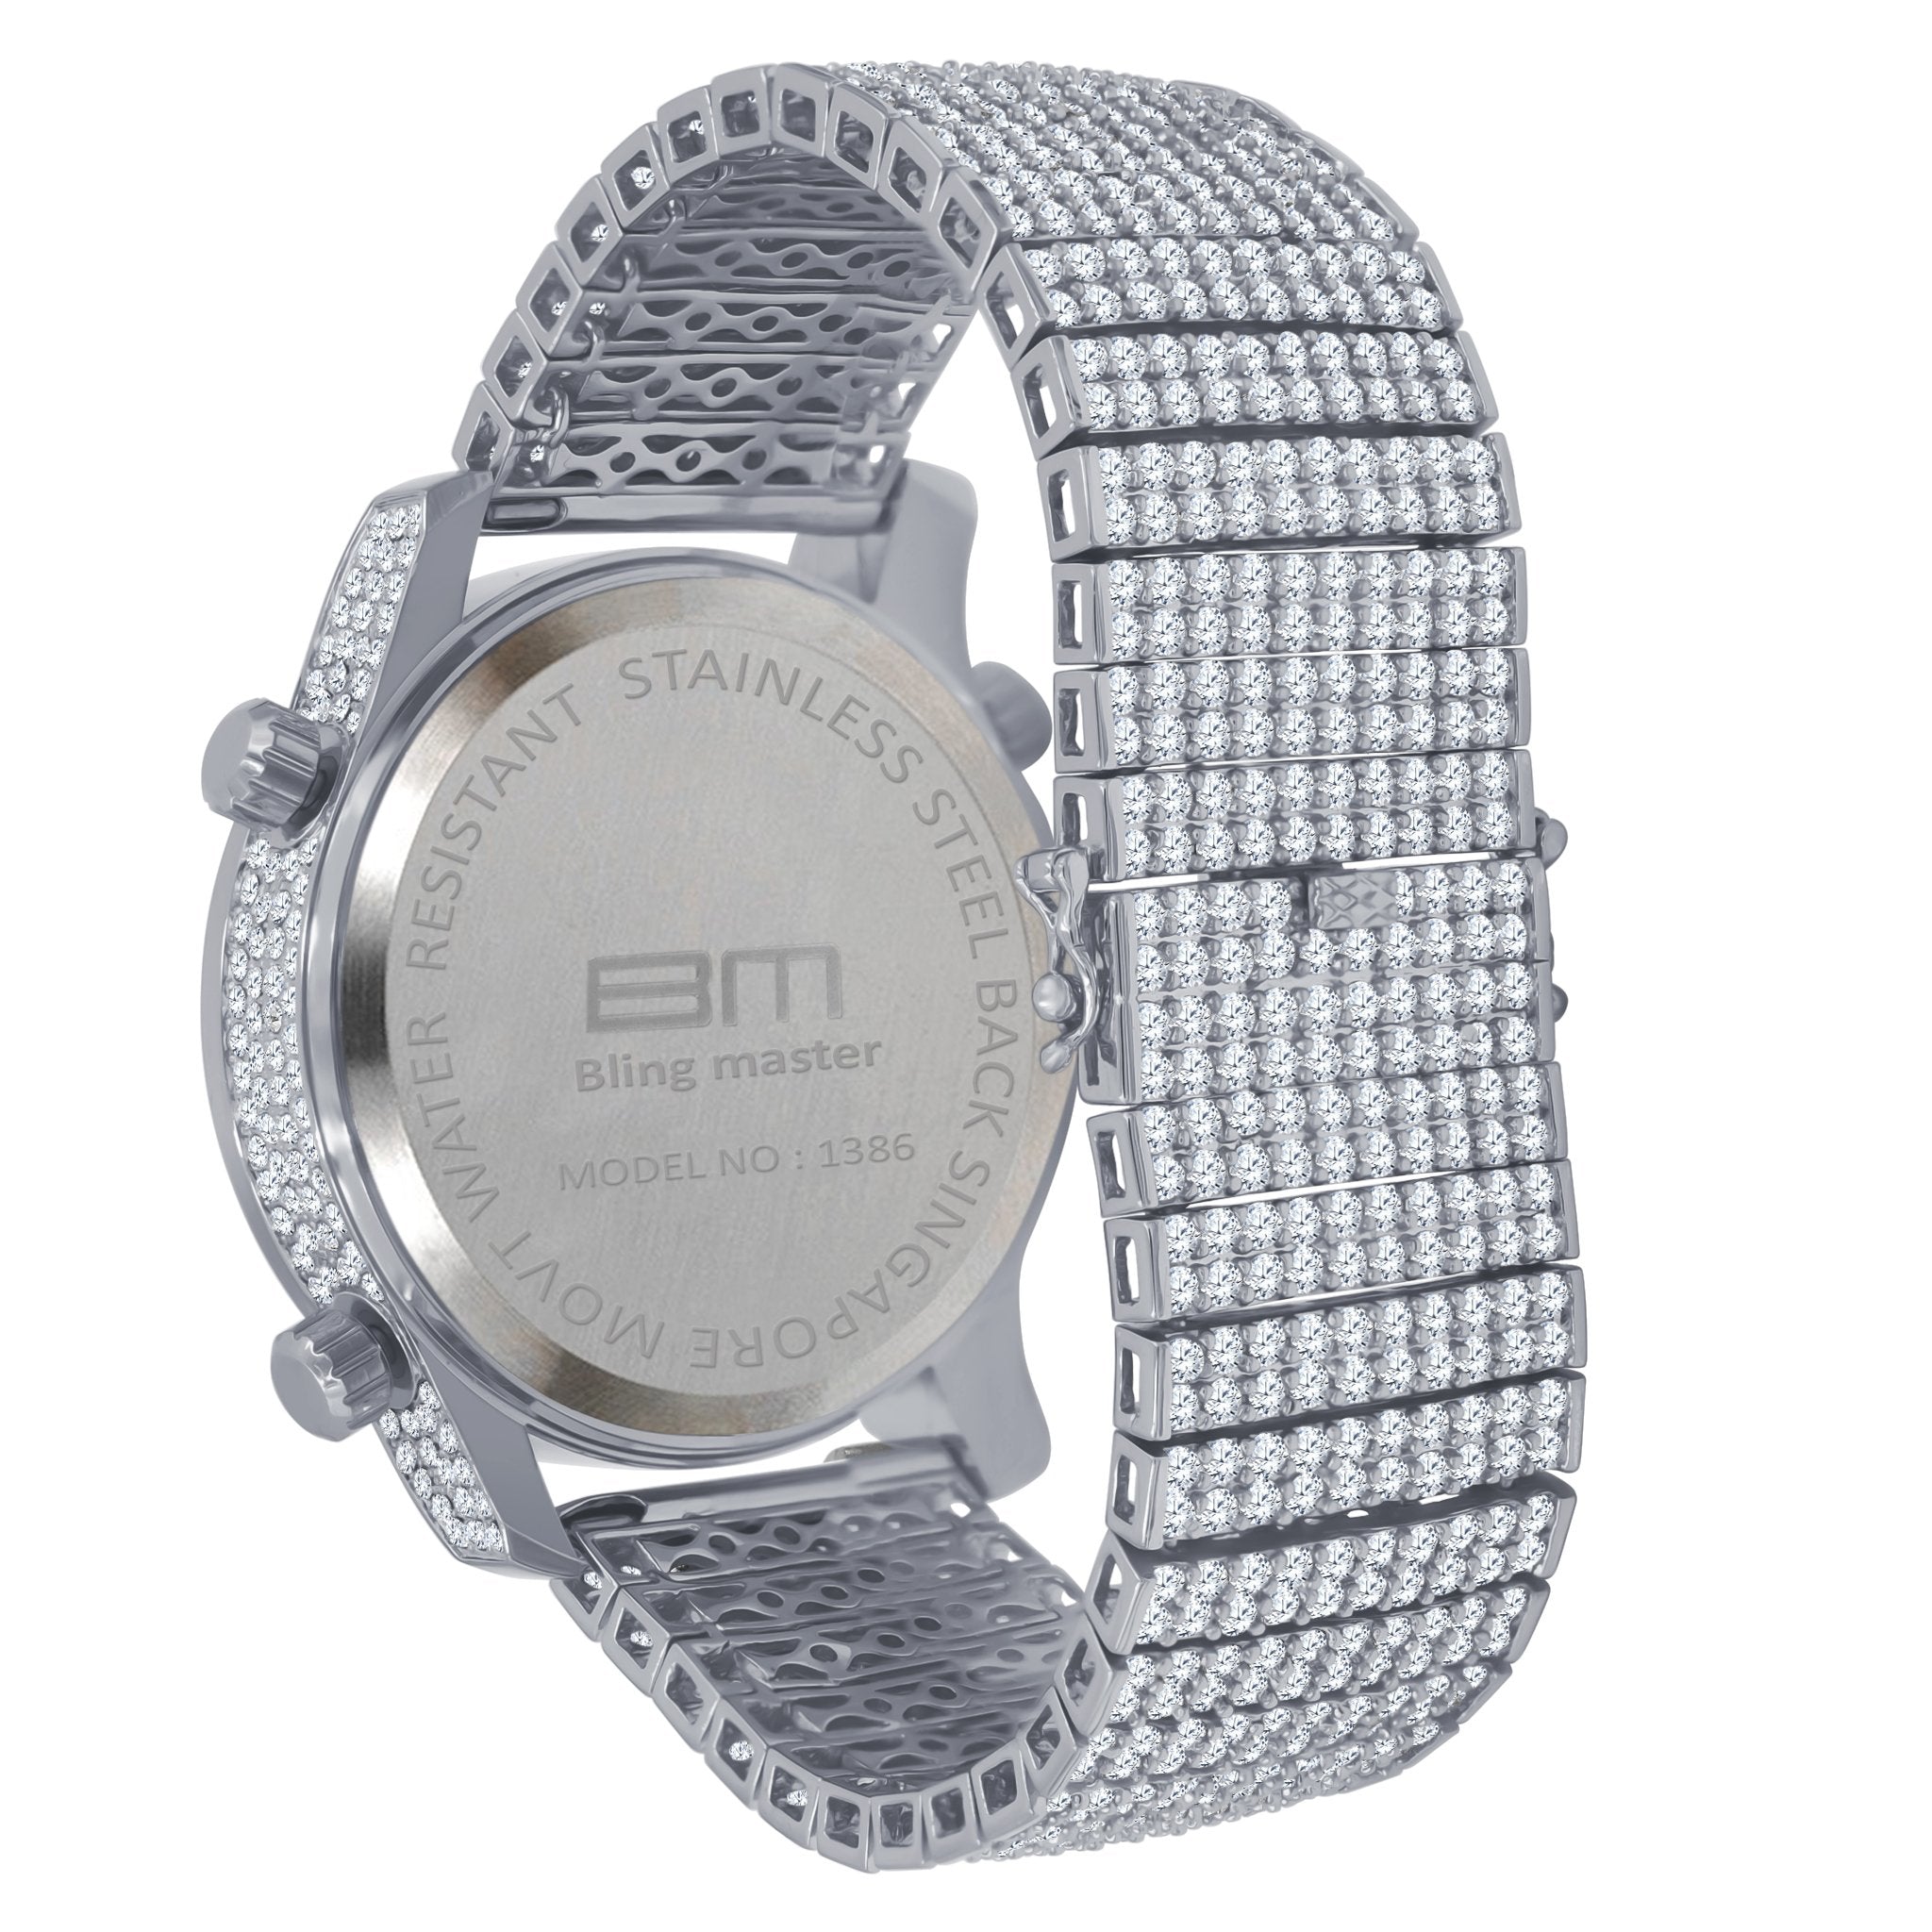 Traveller CZ ICED OUT WATCH | 5110301